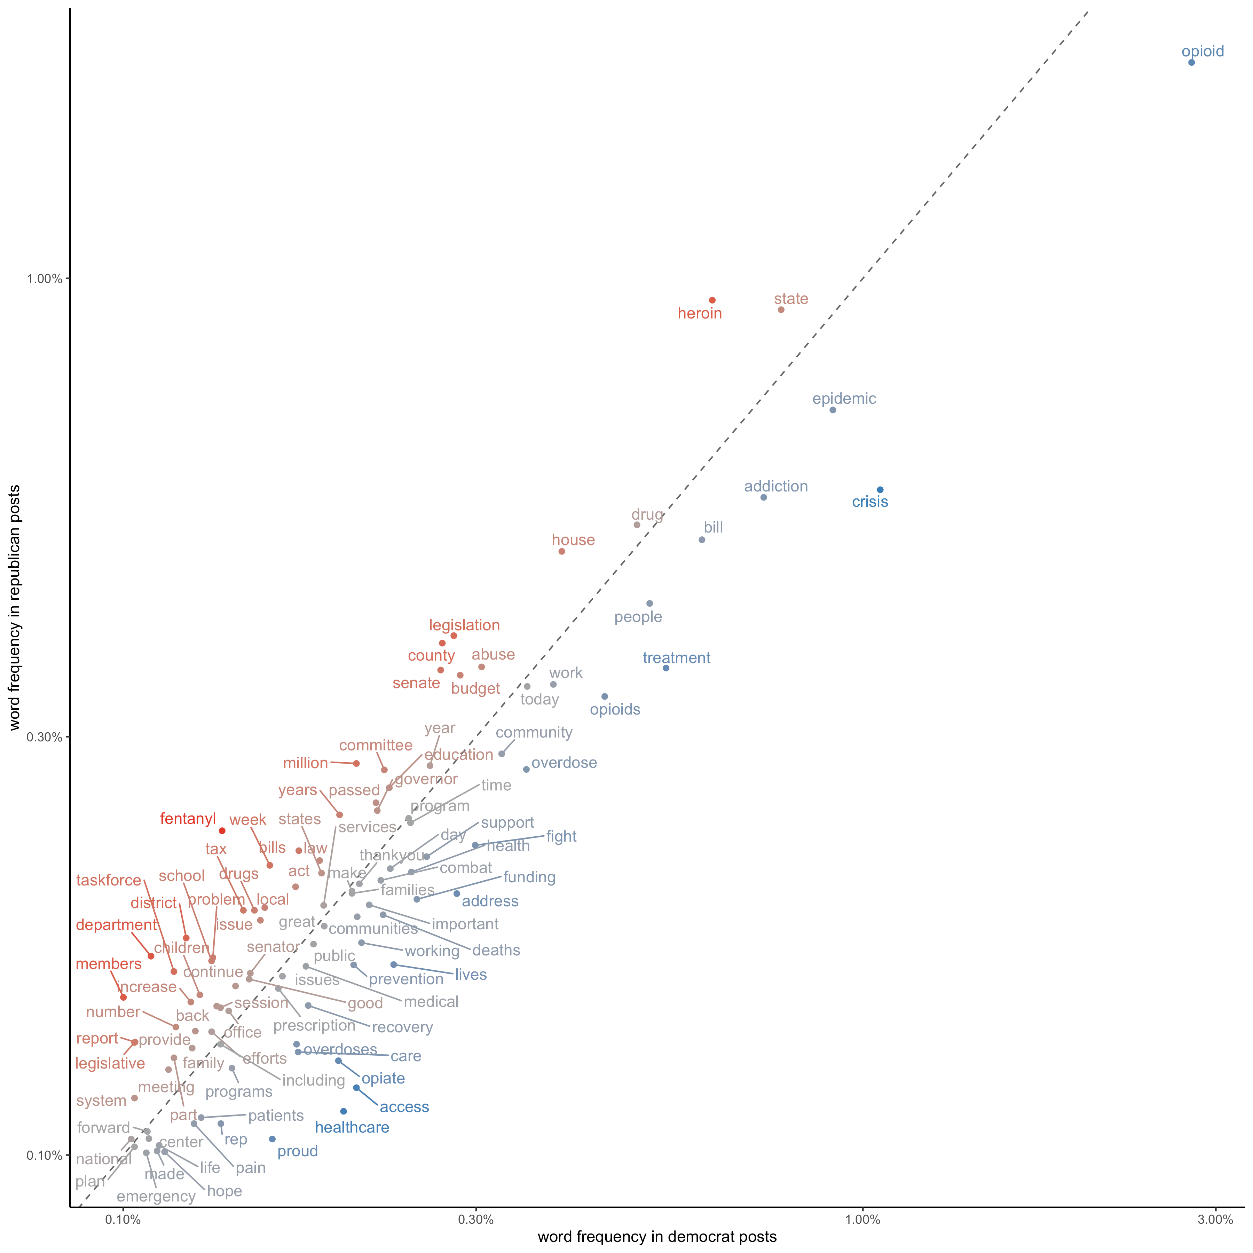 A line graph showing the difference in word frequency in Democratic posts versus Republican posts.